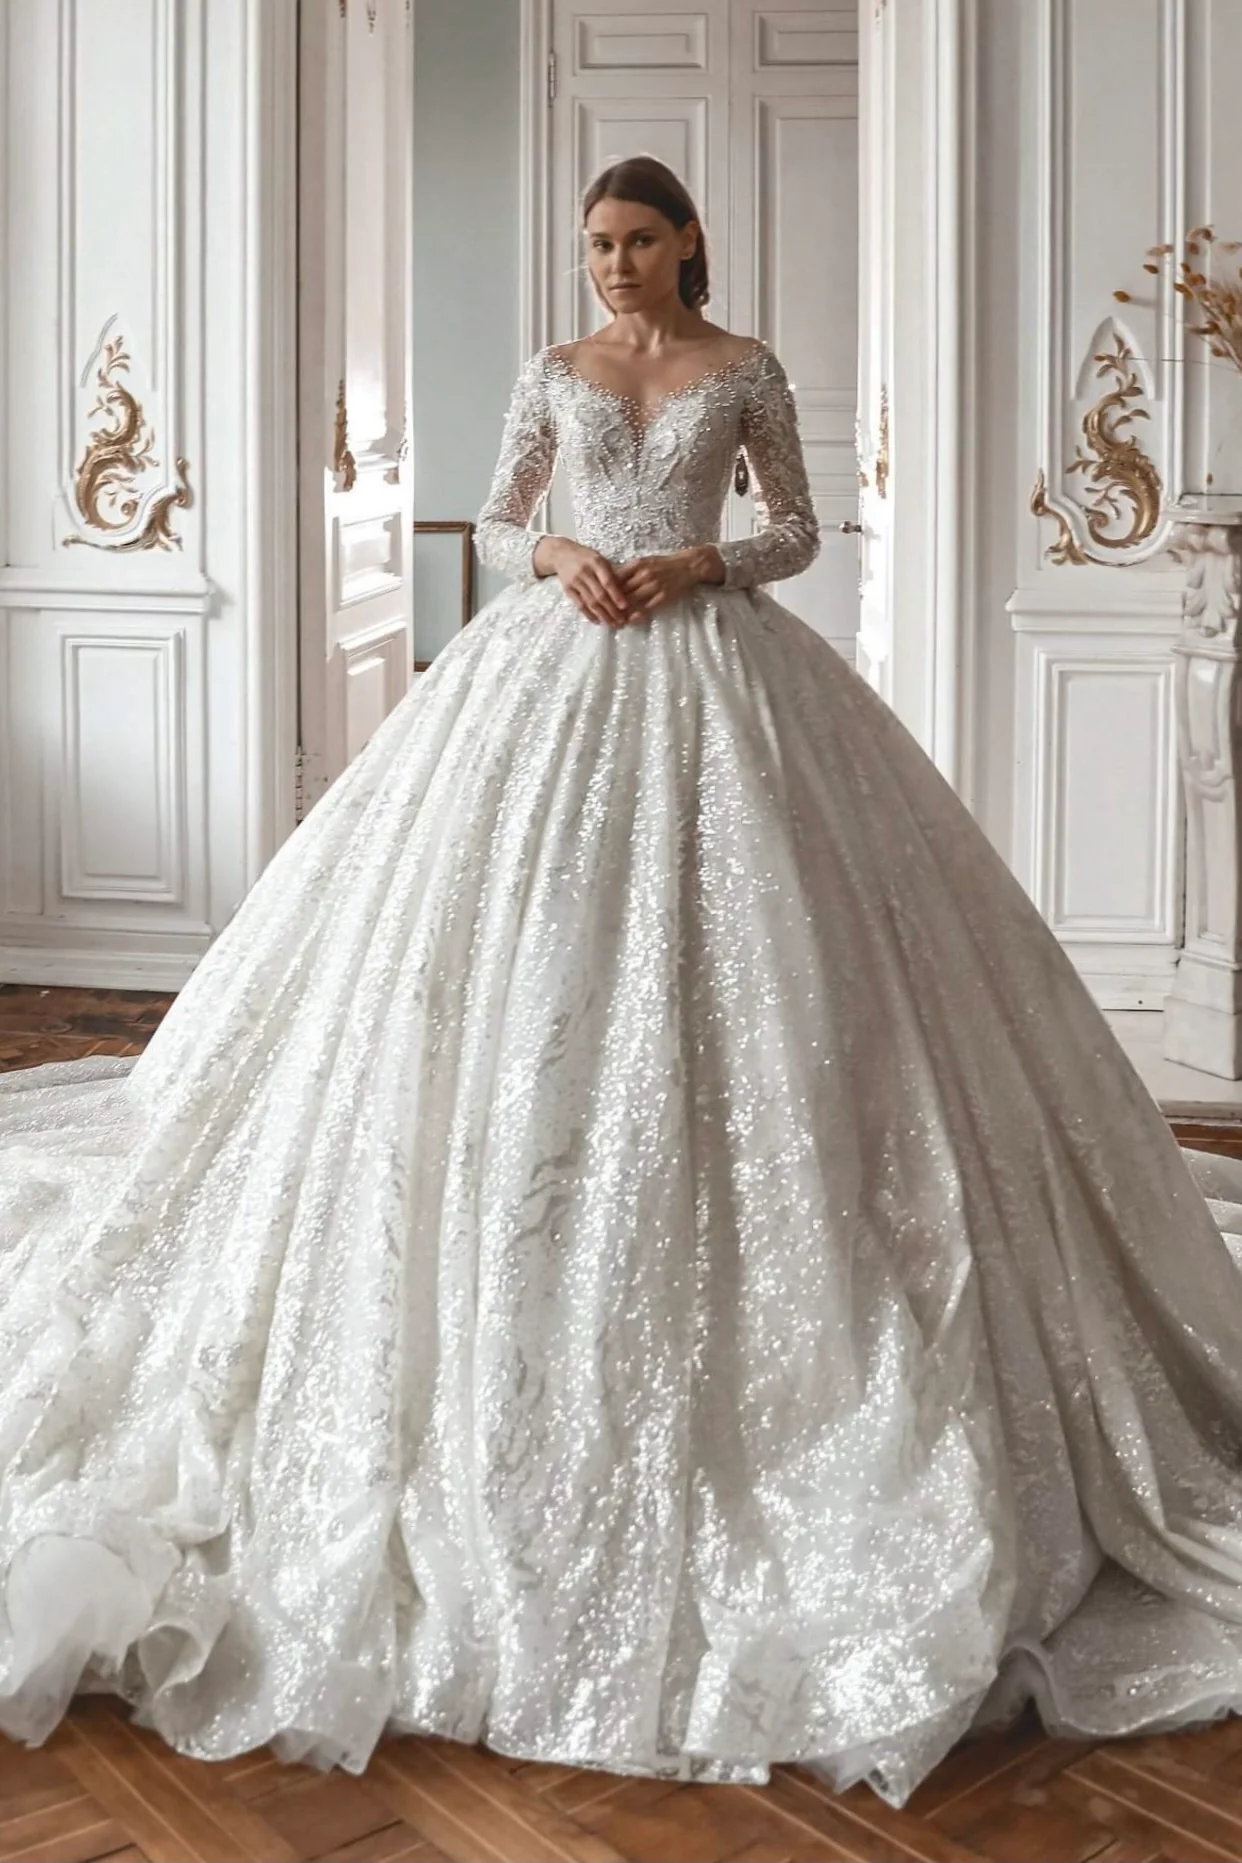 Ball Gowns by Olivia Bottega: Where Elegance Meets Style